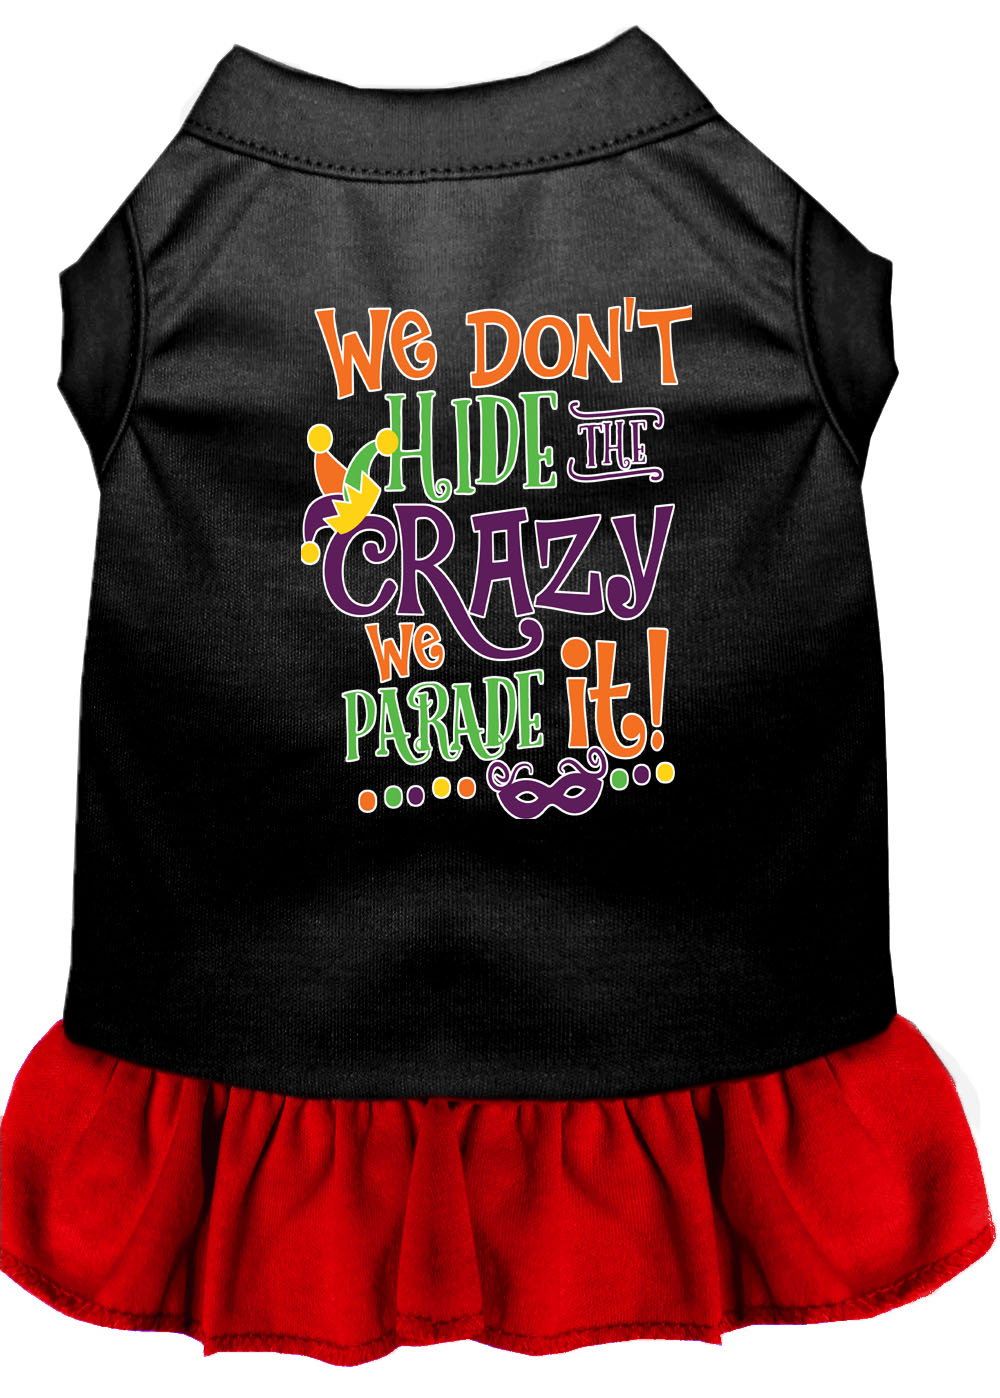 We Don't Hide the Crazy Screen Print Mardi Gras Dog Dress Black with Red XL